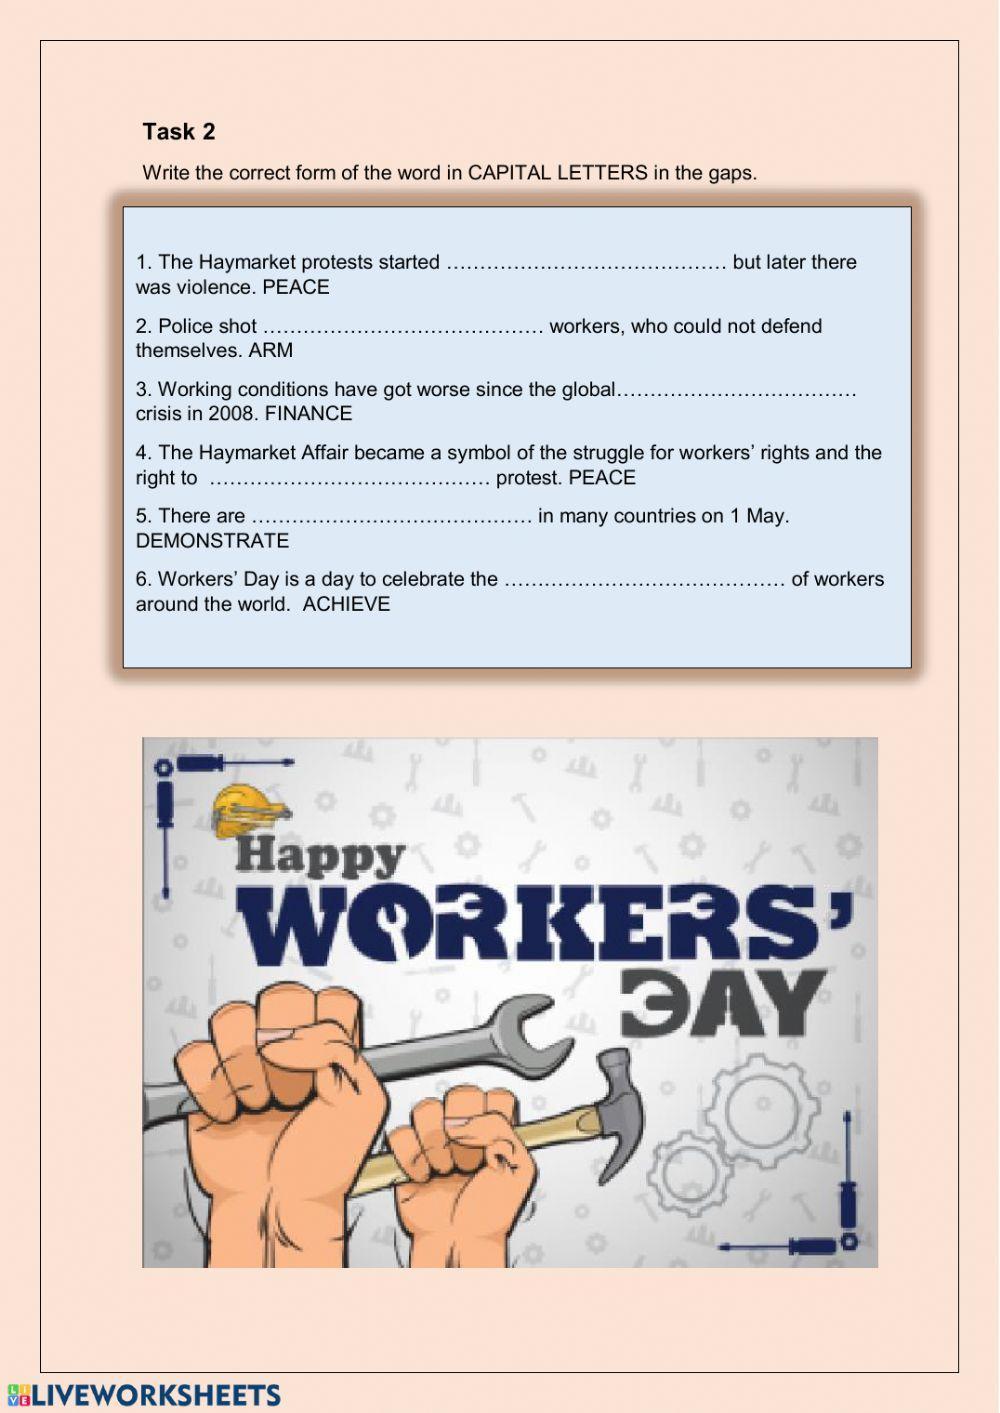 International workers' day